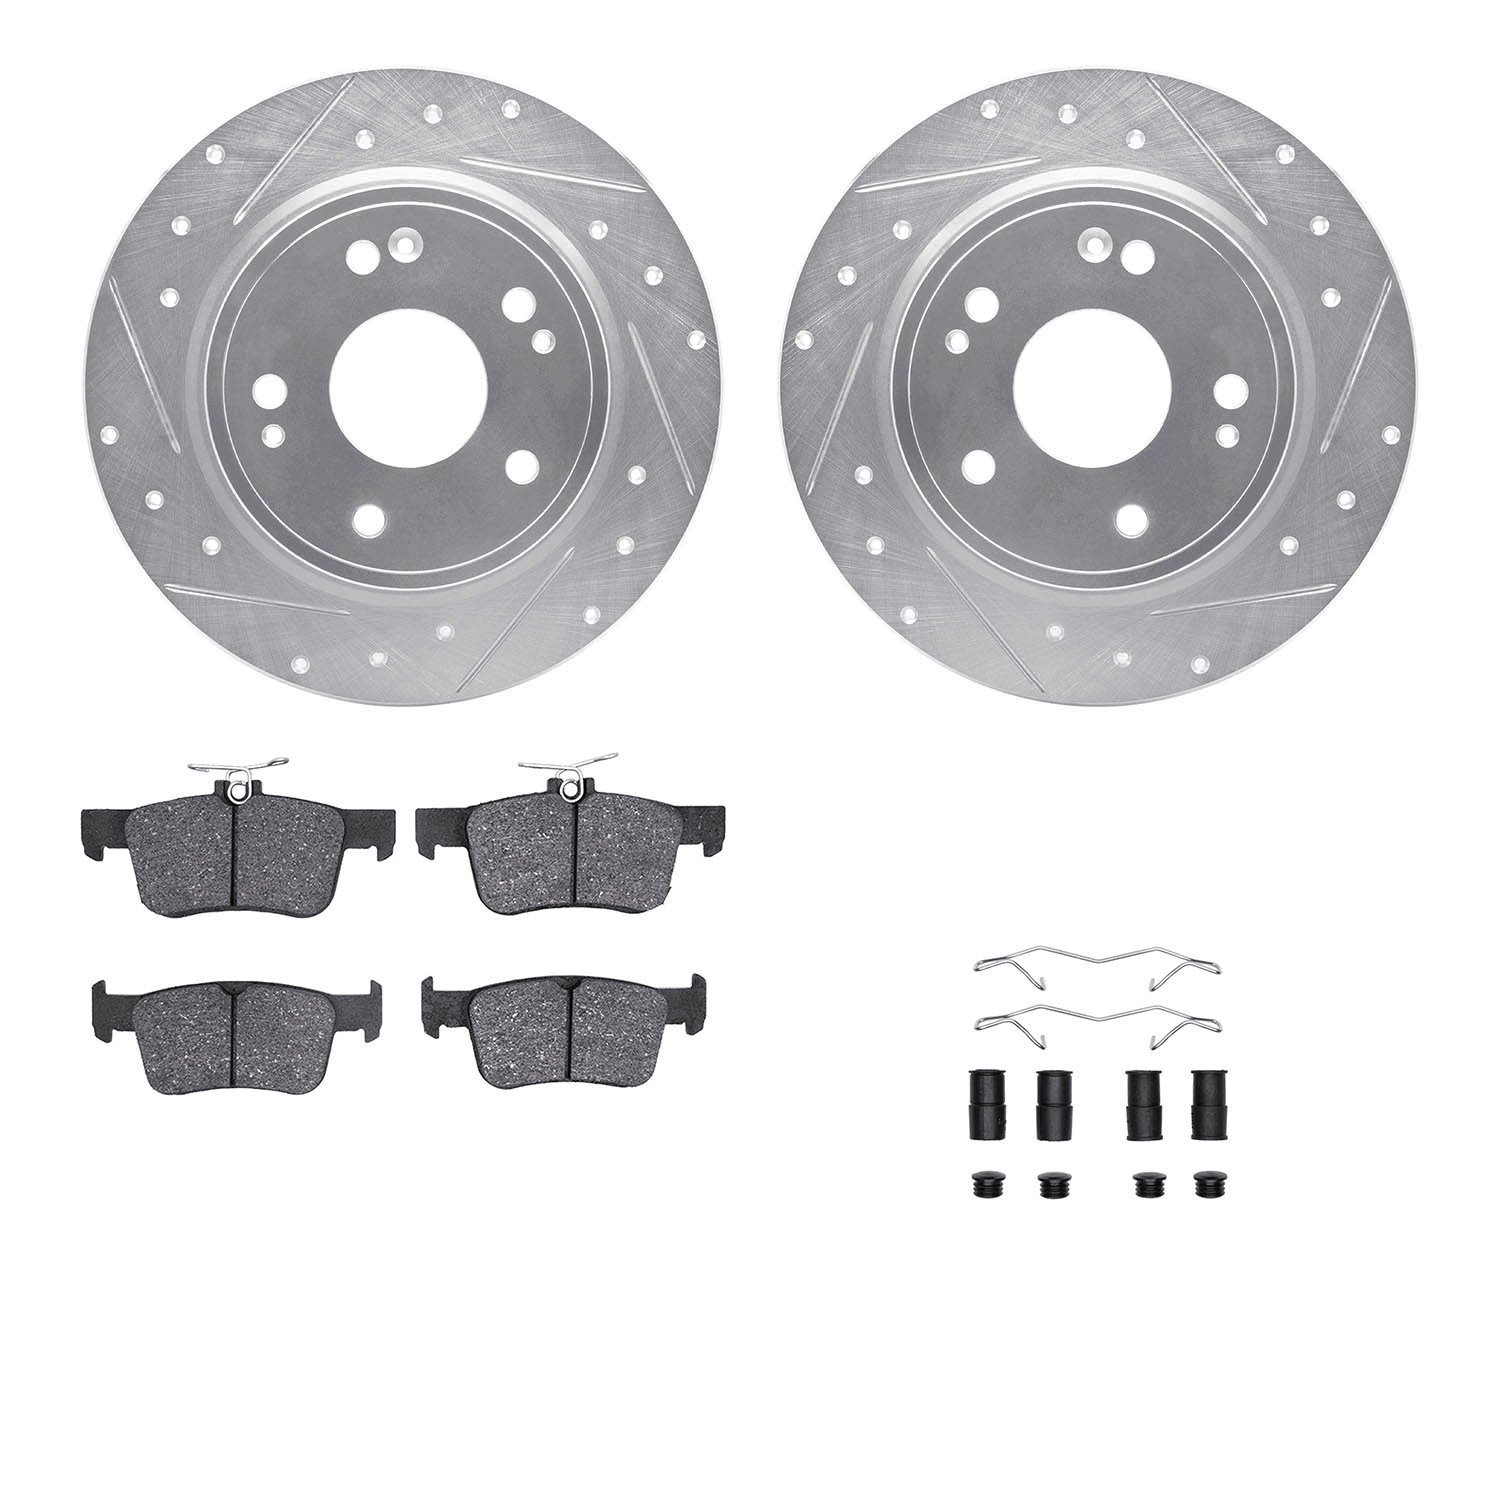 7312-59114 Drilled/Slotted Brake Rotor with 3000-Series Ceramic Brake Pads Kit & Hardware [Silver], Fits Select Acura/Honda, Pos